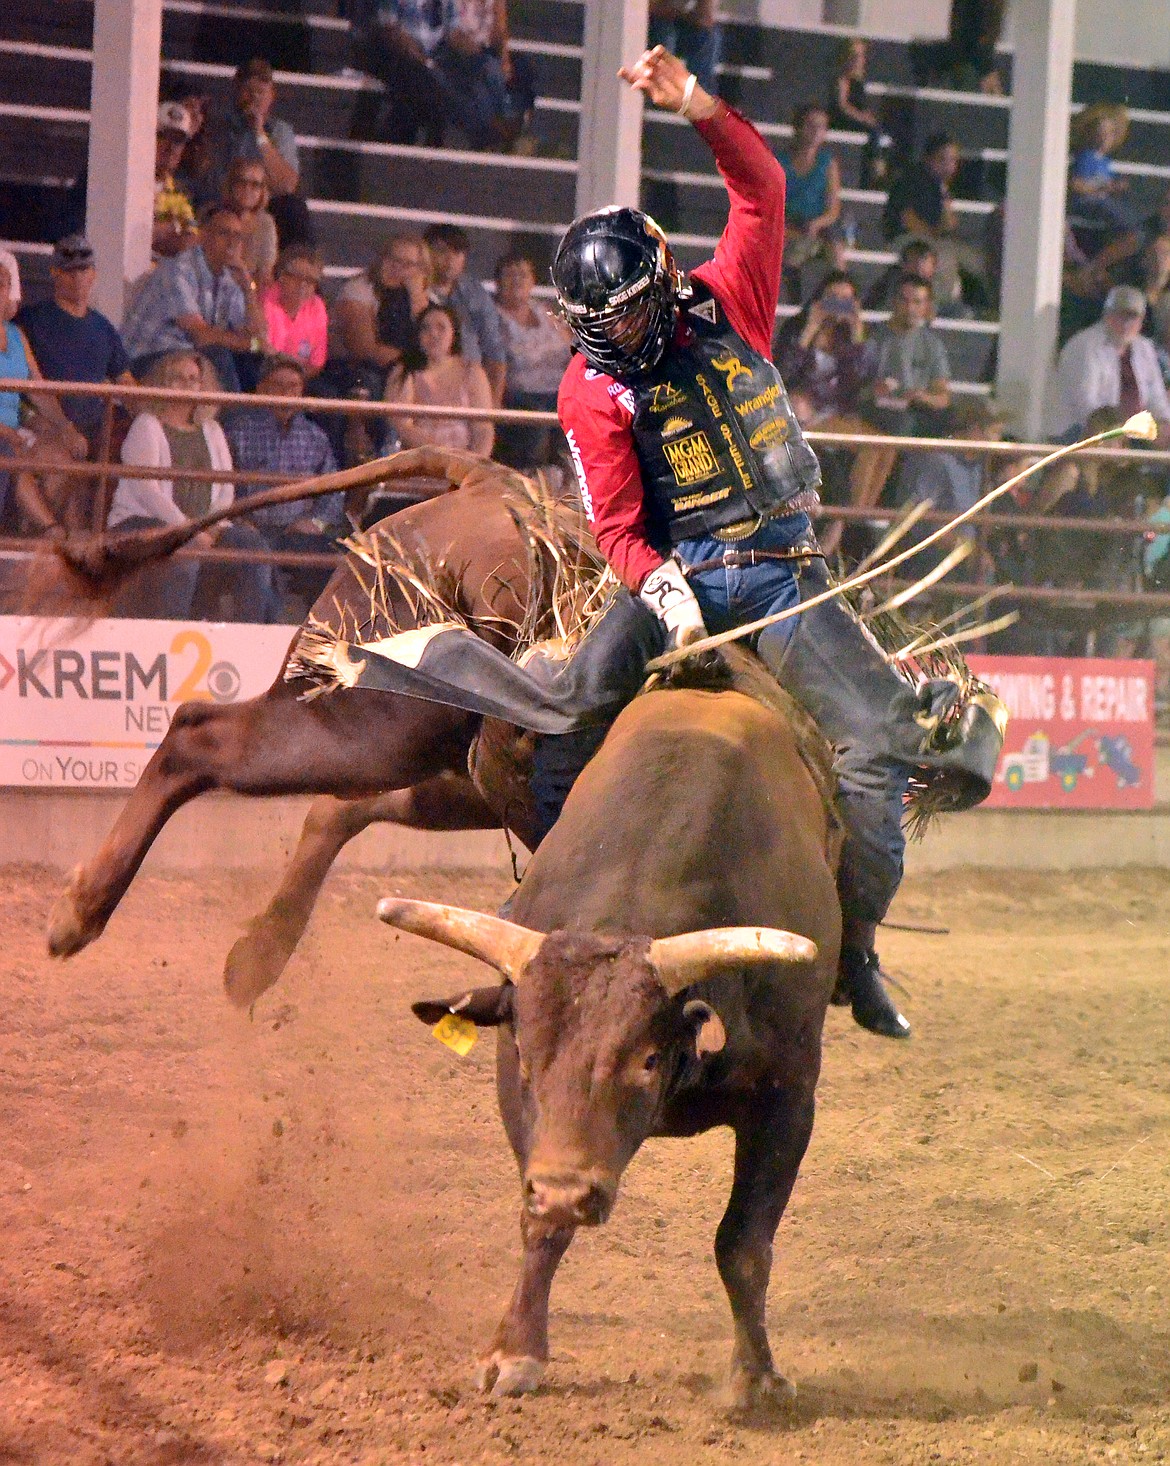 World Champion Bull Rider Sage Kimzey notching up another good ride in Plains as he prepares to round out the regular season. (Erin Jusseaume/ Clark Fork Valley Press)